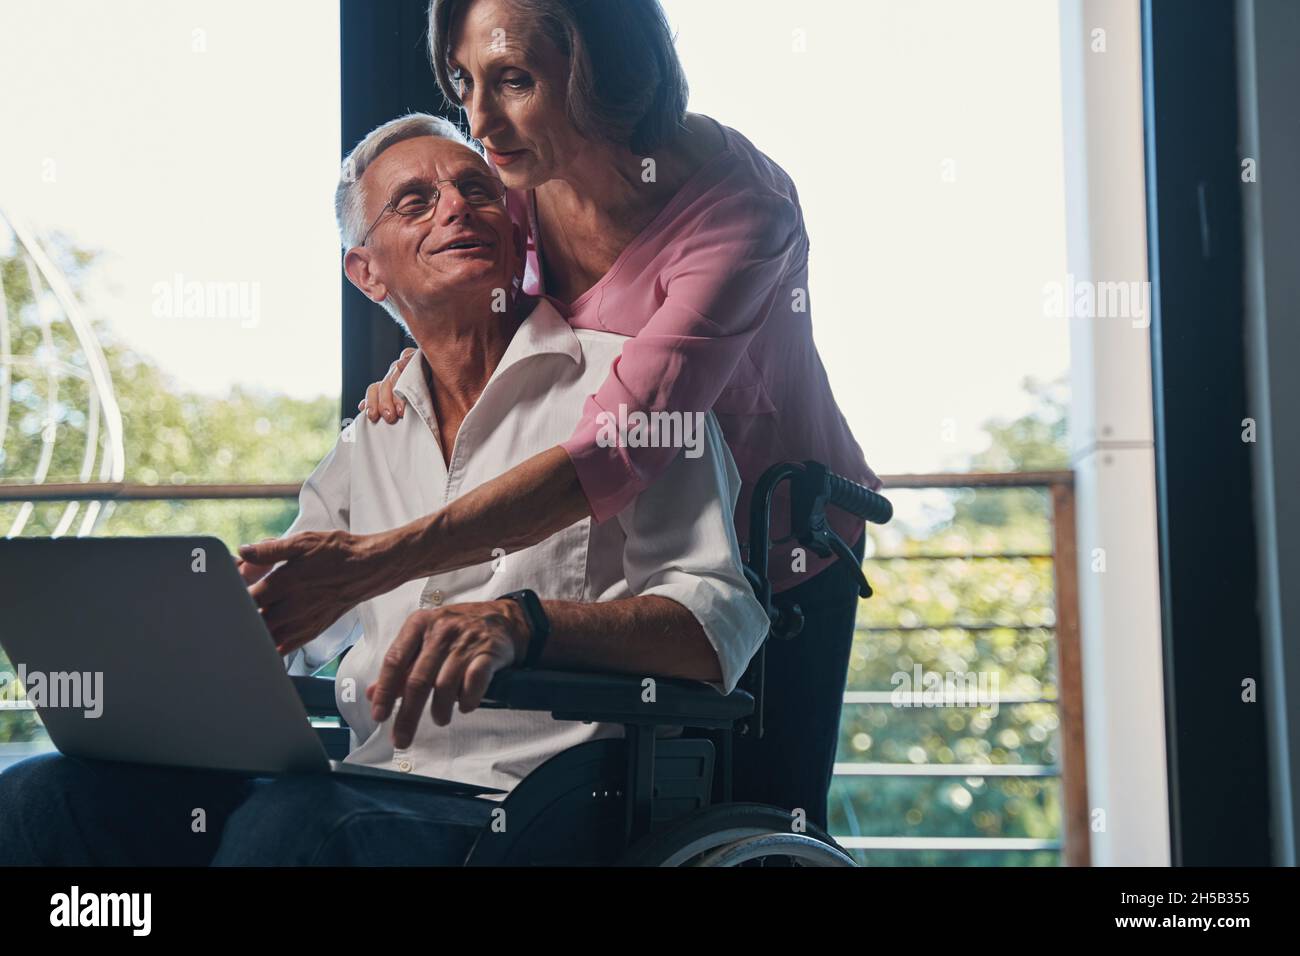 Senior male with disability turning to his wife behind him Stock Photo